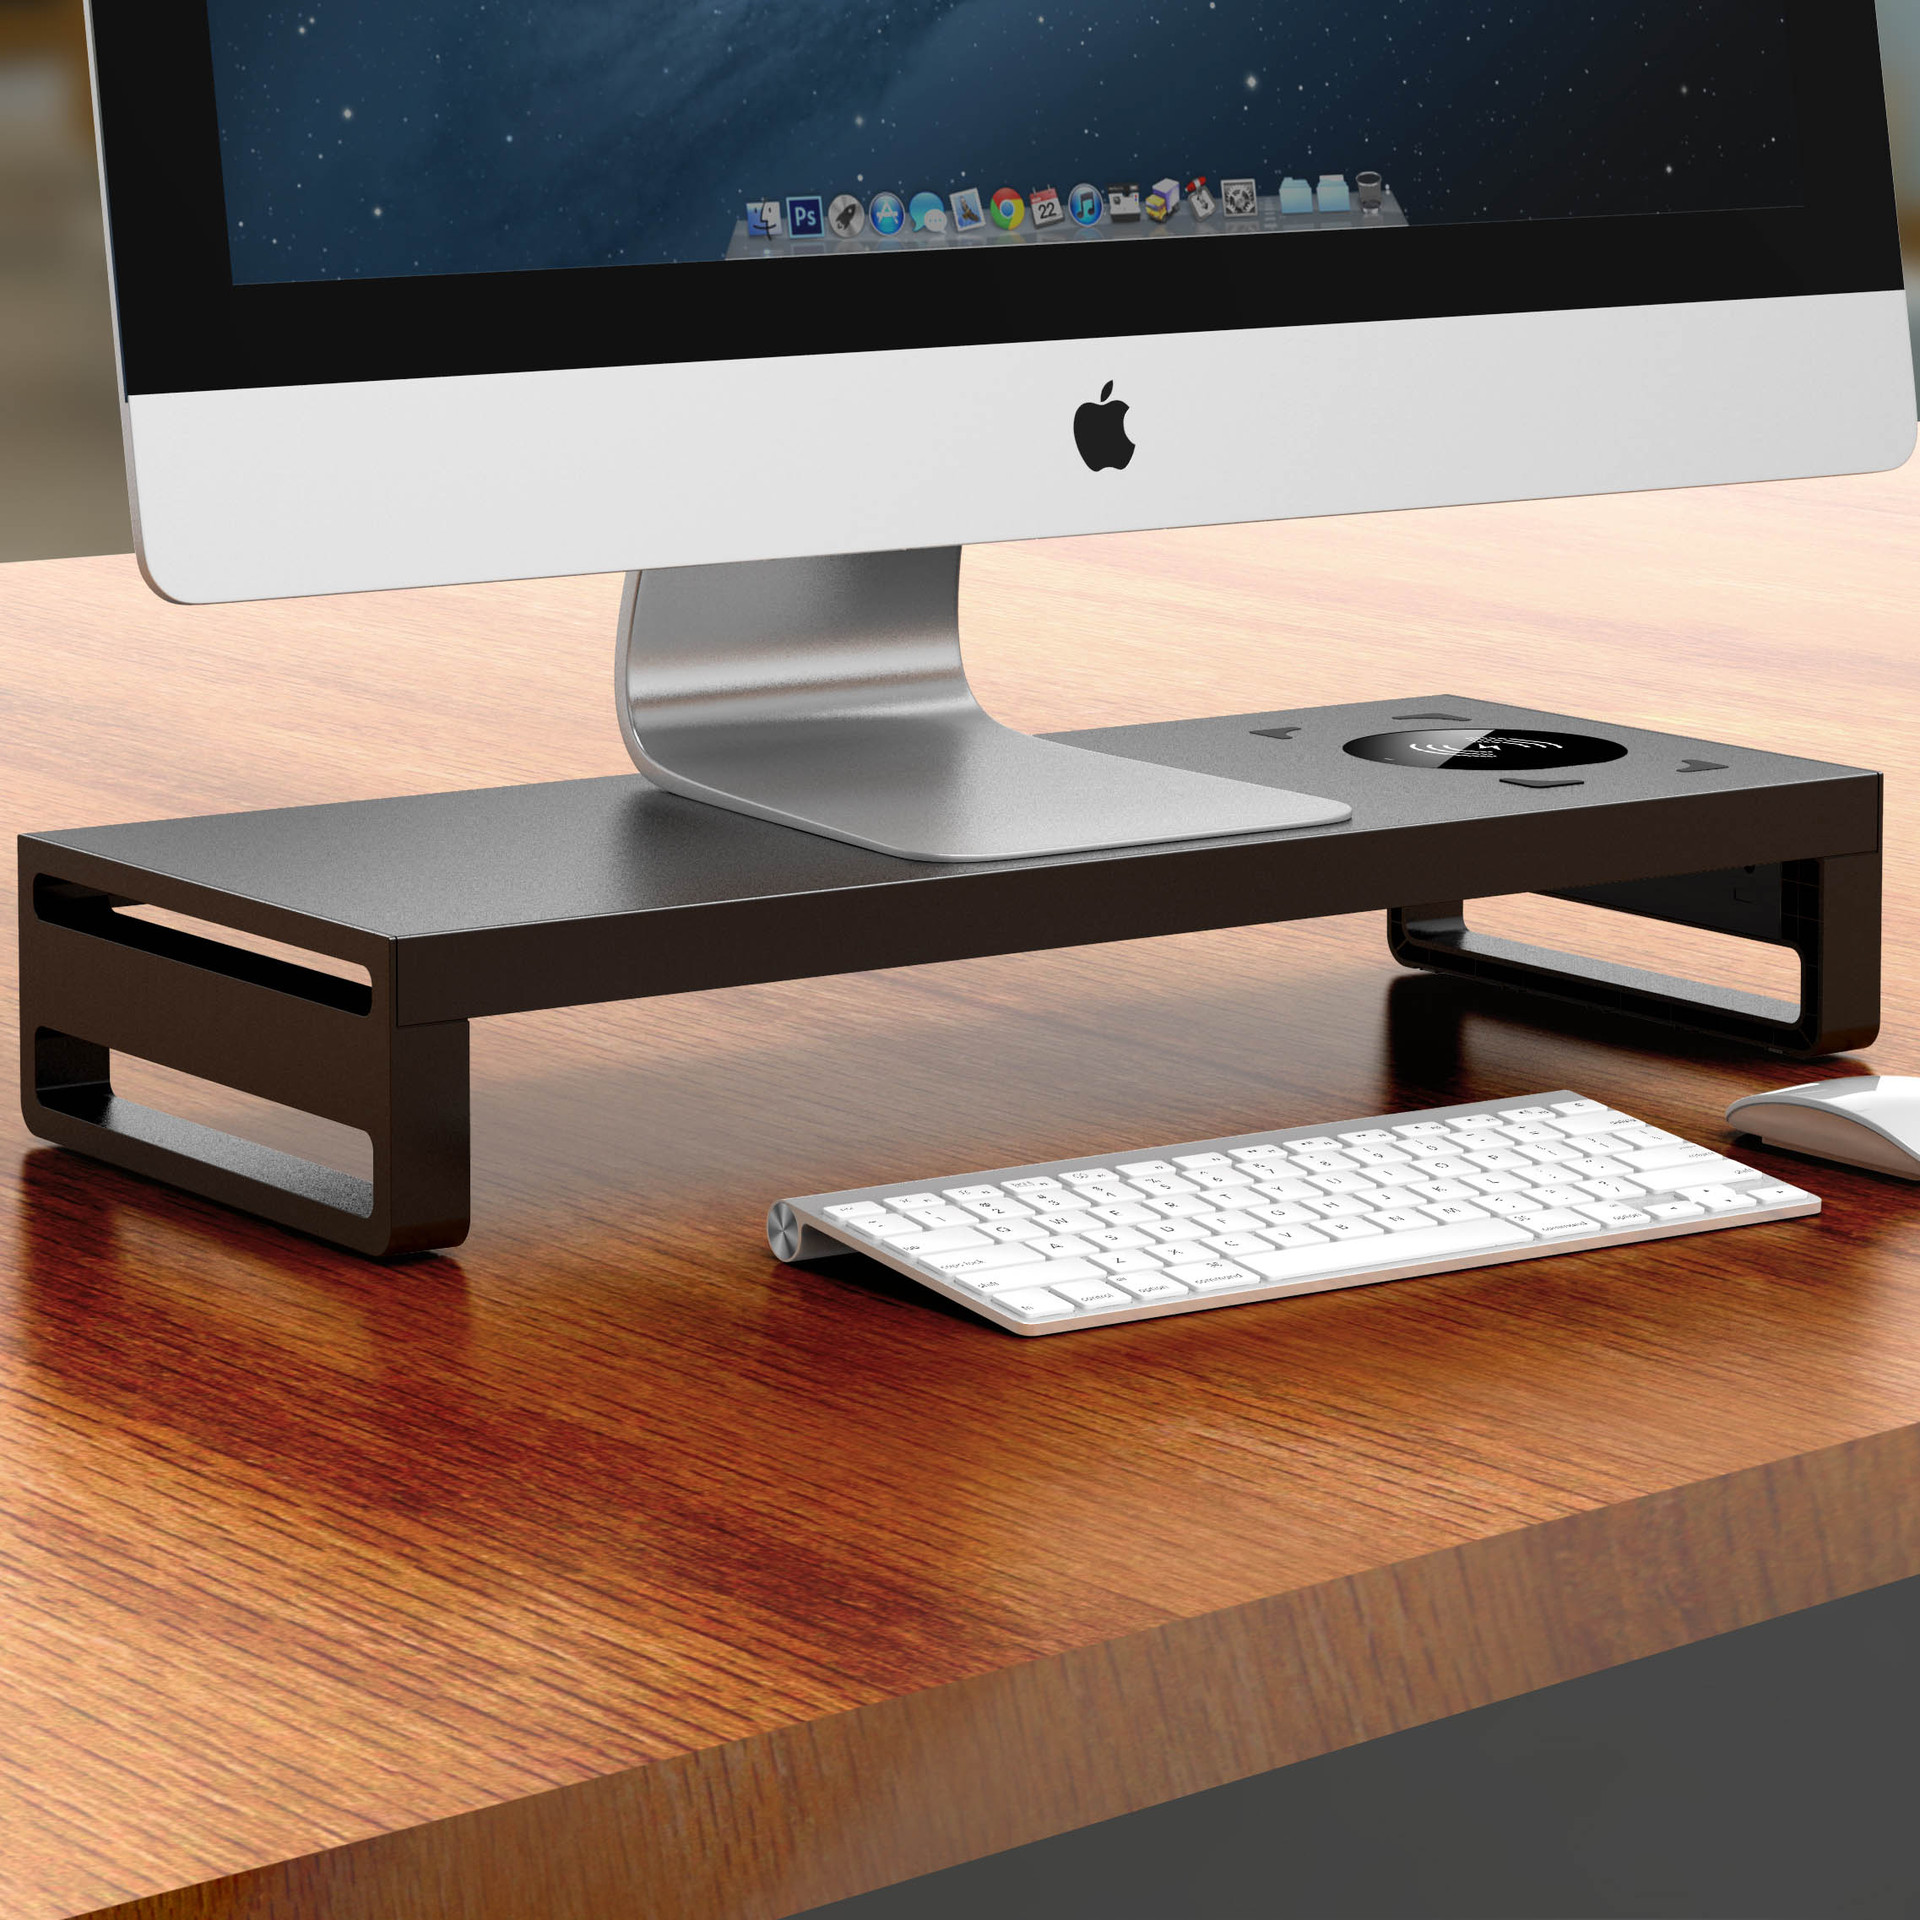 ABS-Laptop-Stand-with-USB-30-Charging-Port-Wireless-Charger-For-Laptop-PC-Monitor-Increase-Table-Org-1701137-2